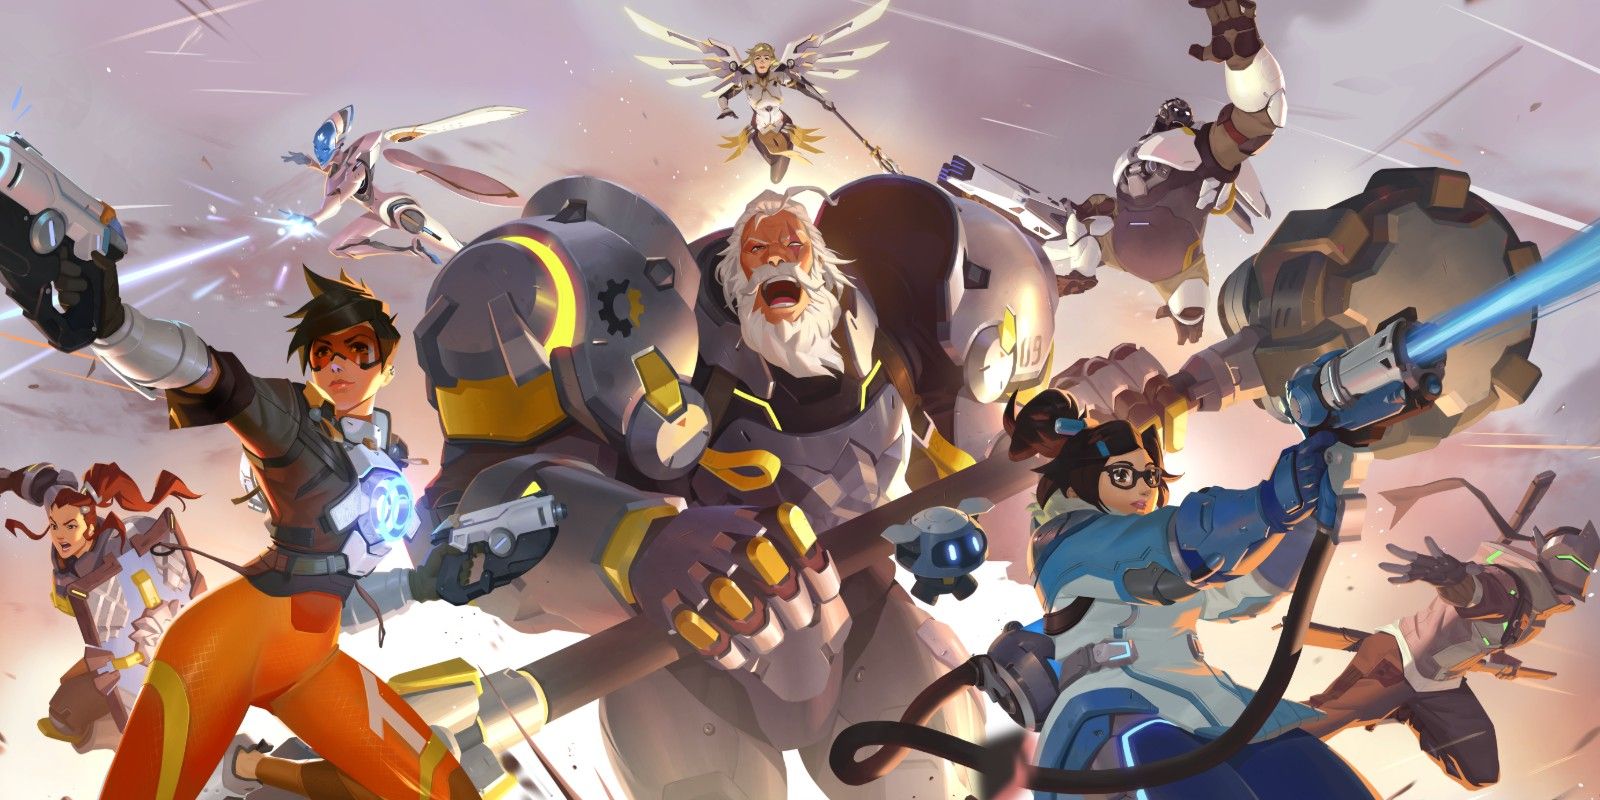 Artwork promoting the PvE exerience for Overwatch 2 showing Tracer, Reinhardt, and Mei with various heroes in the background.